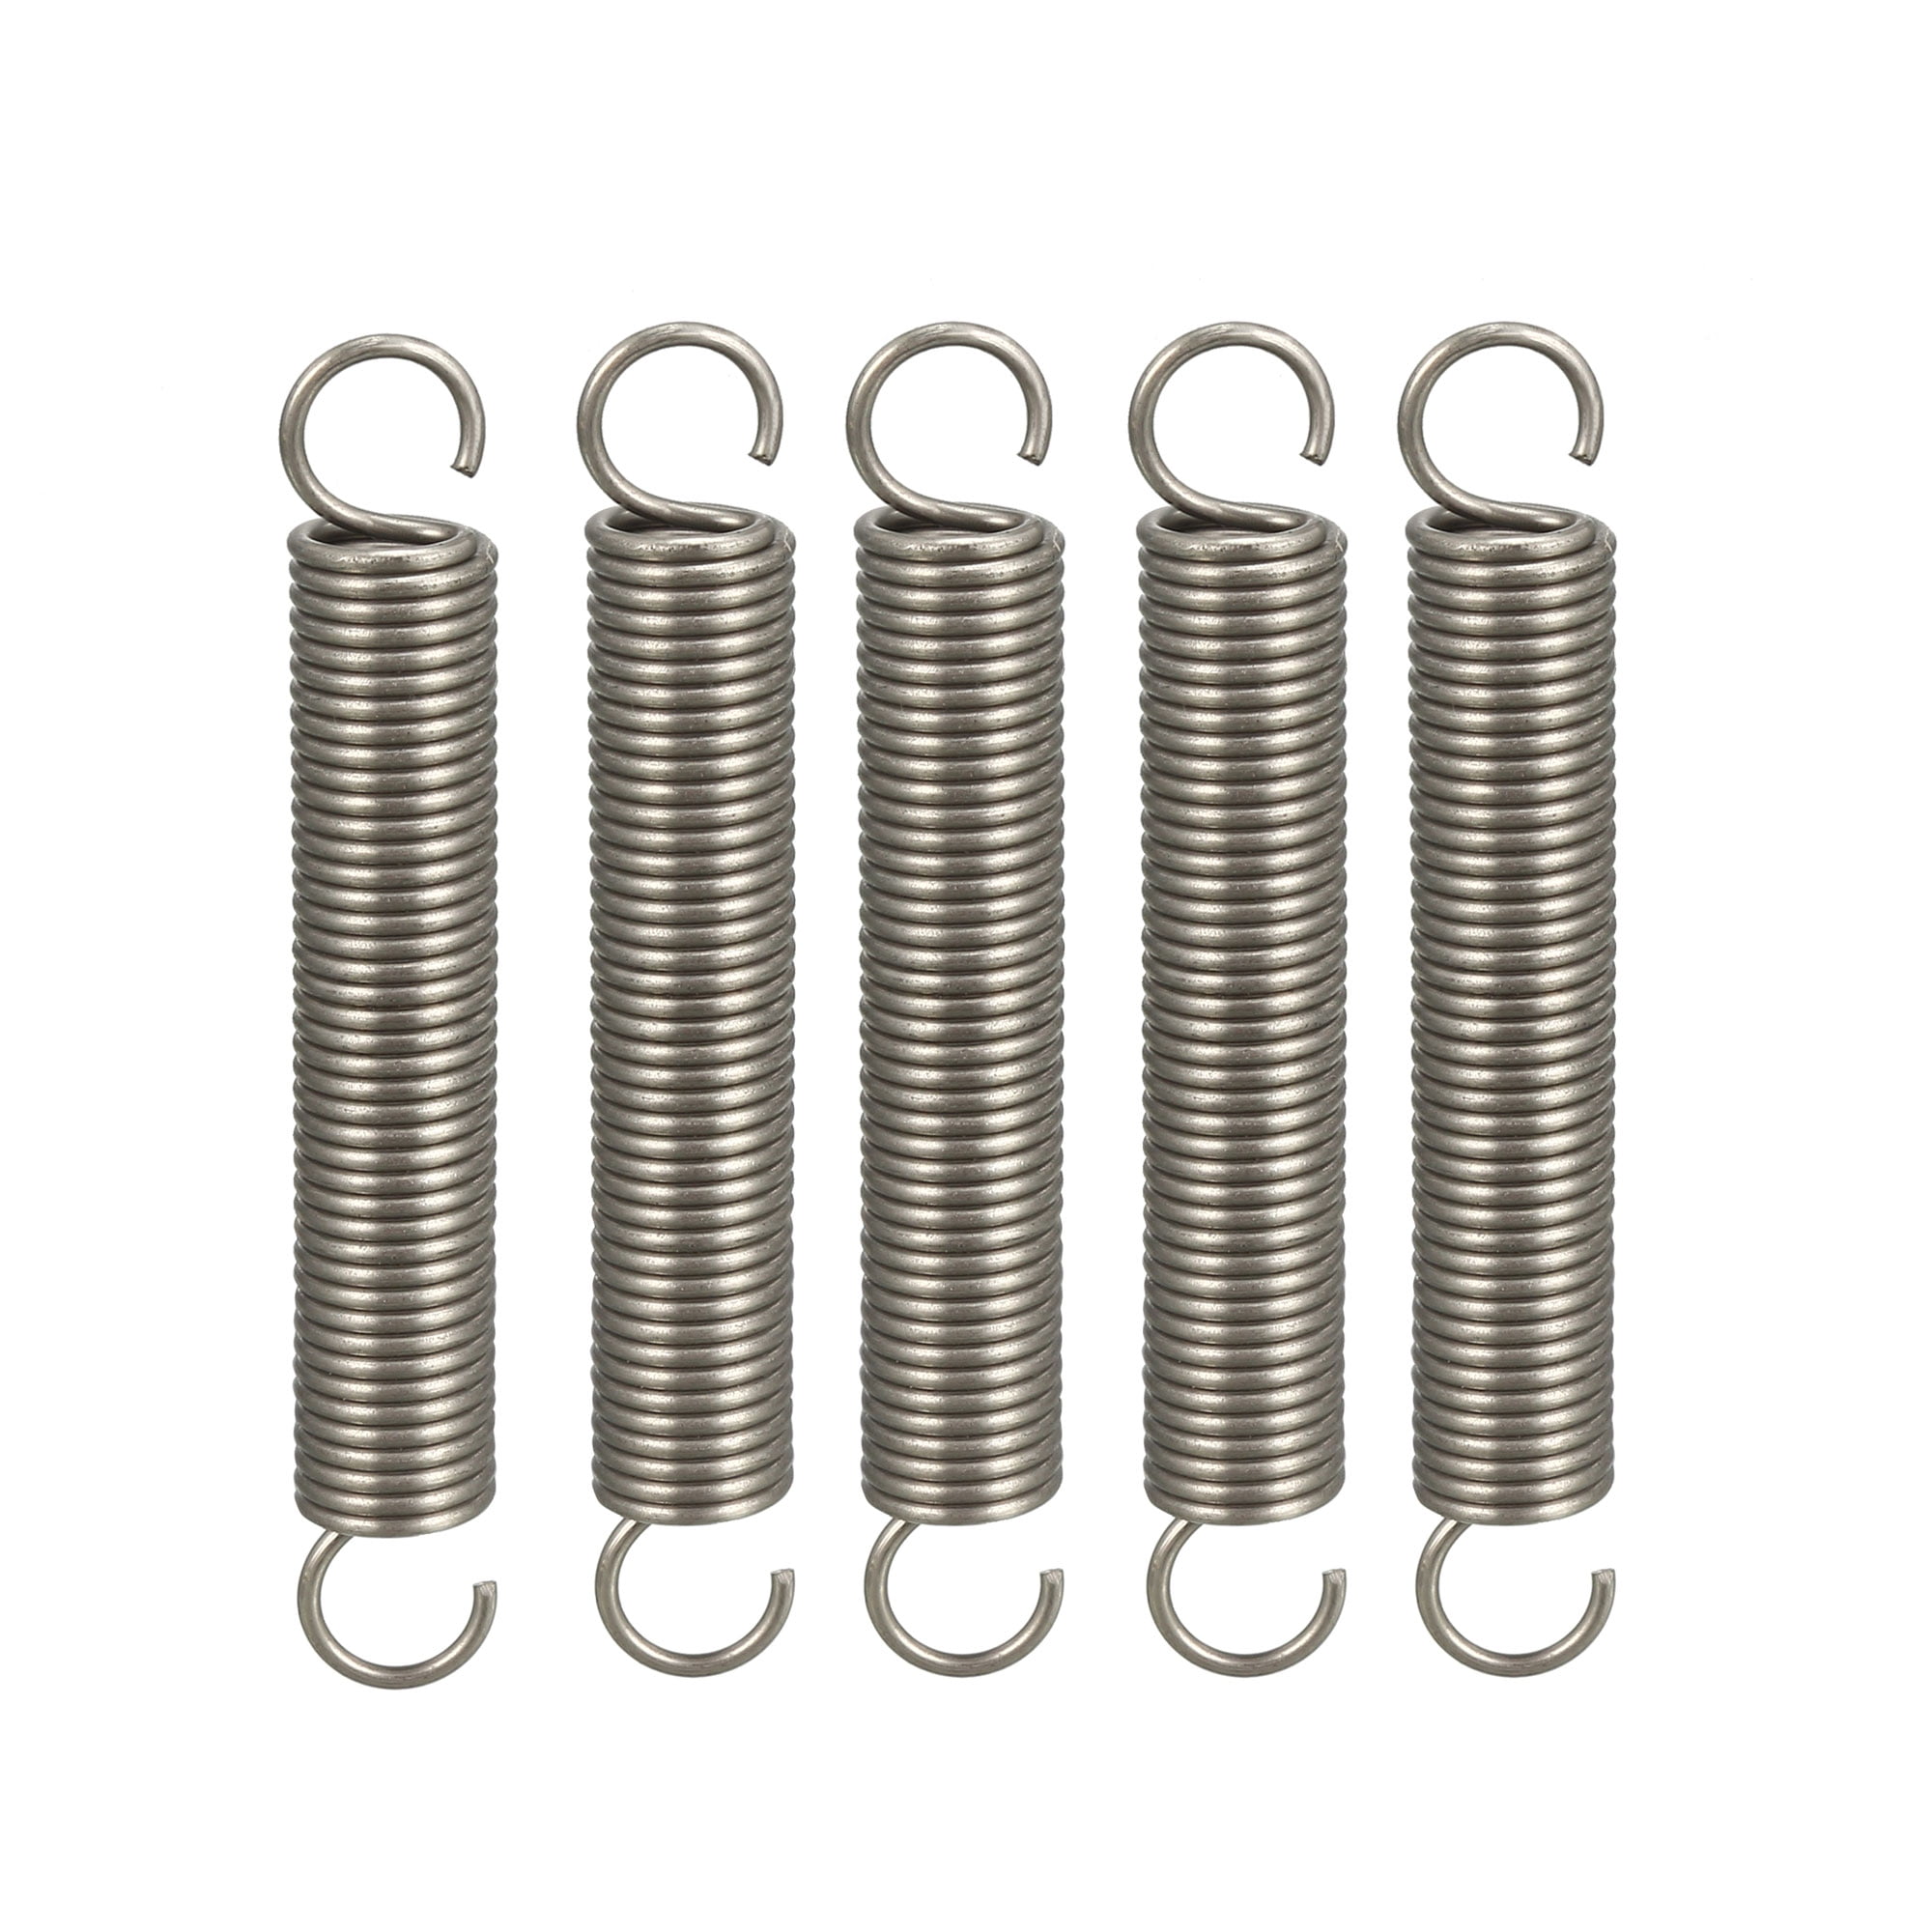 Stainless Steel Dual Hook Small Tension Spring Hardware Accessories 10 Pieces 